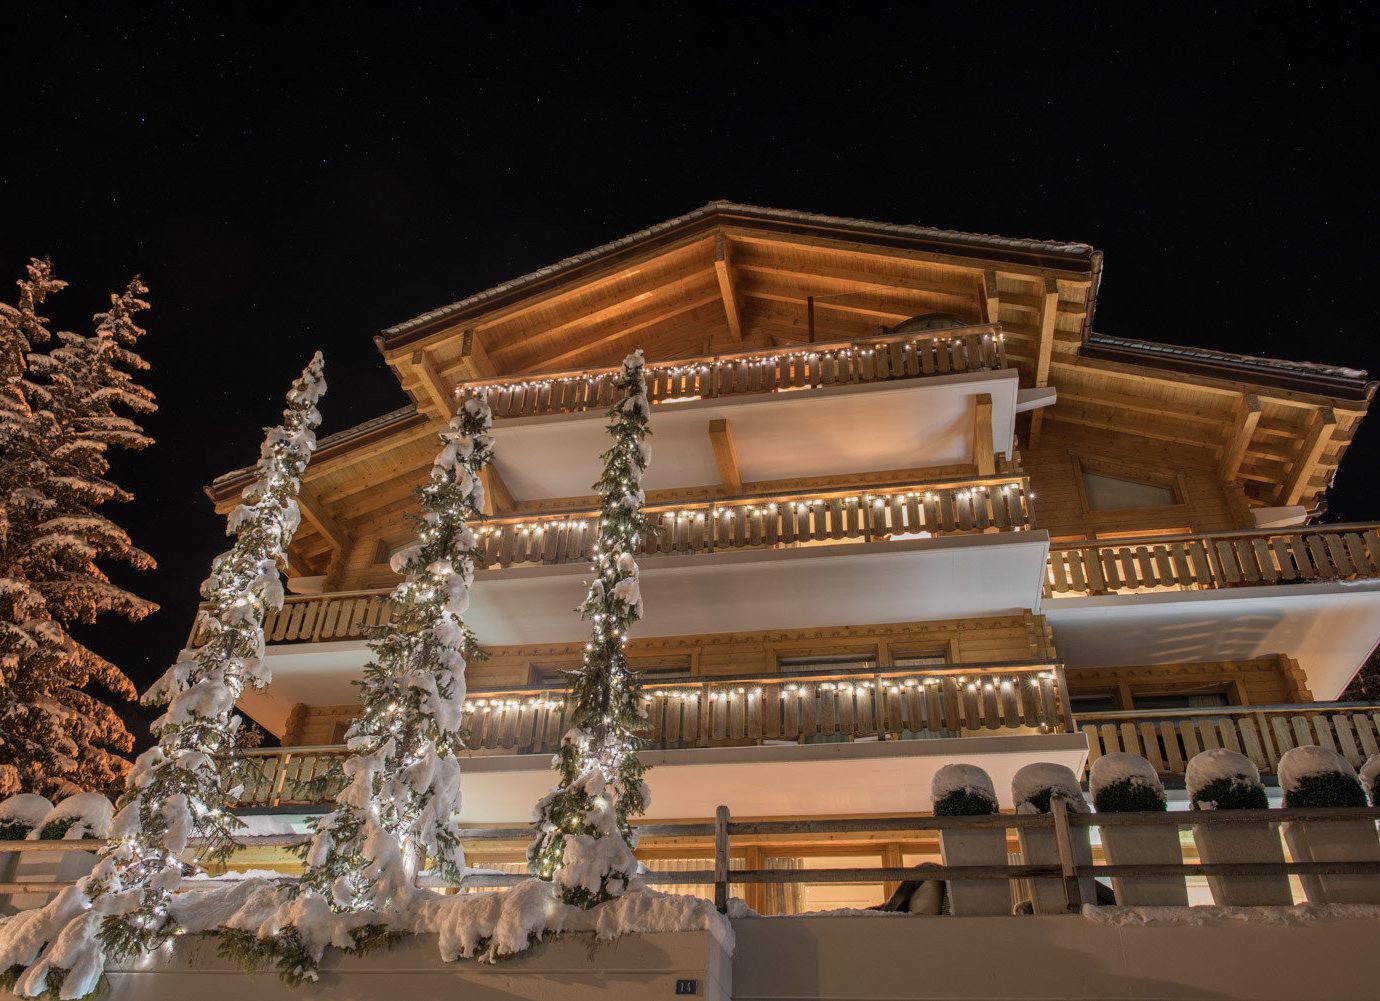 Hotels Luxury Travel Mountains + Skiing night lighting several